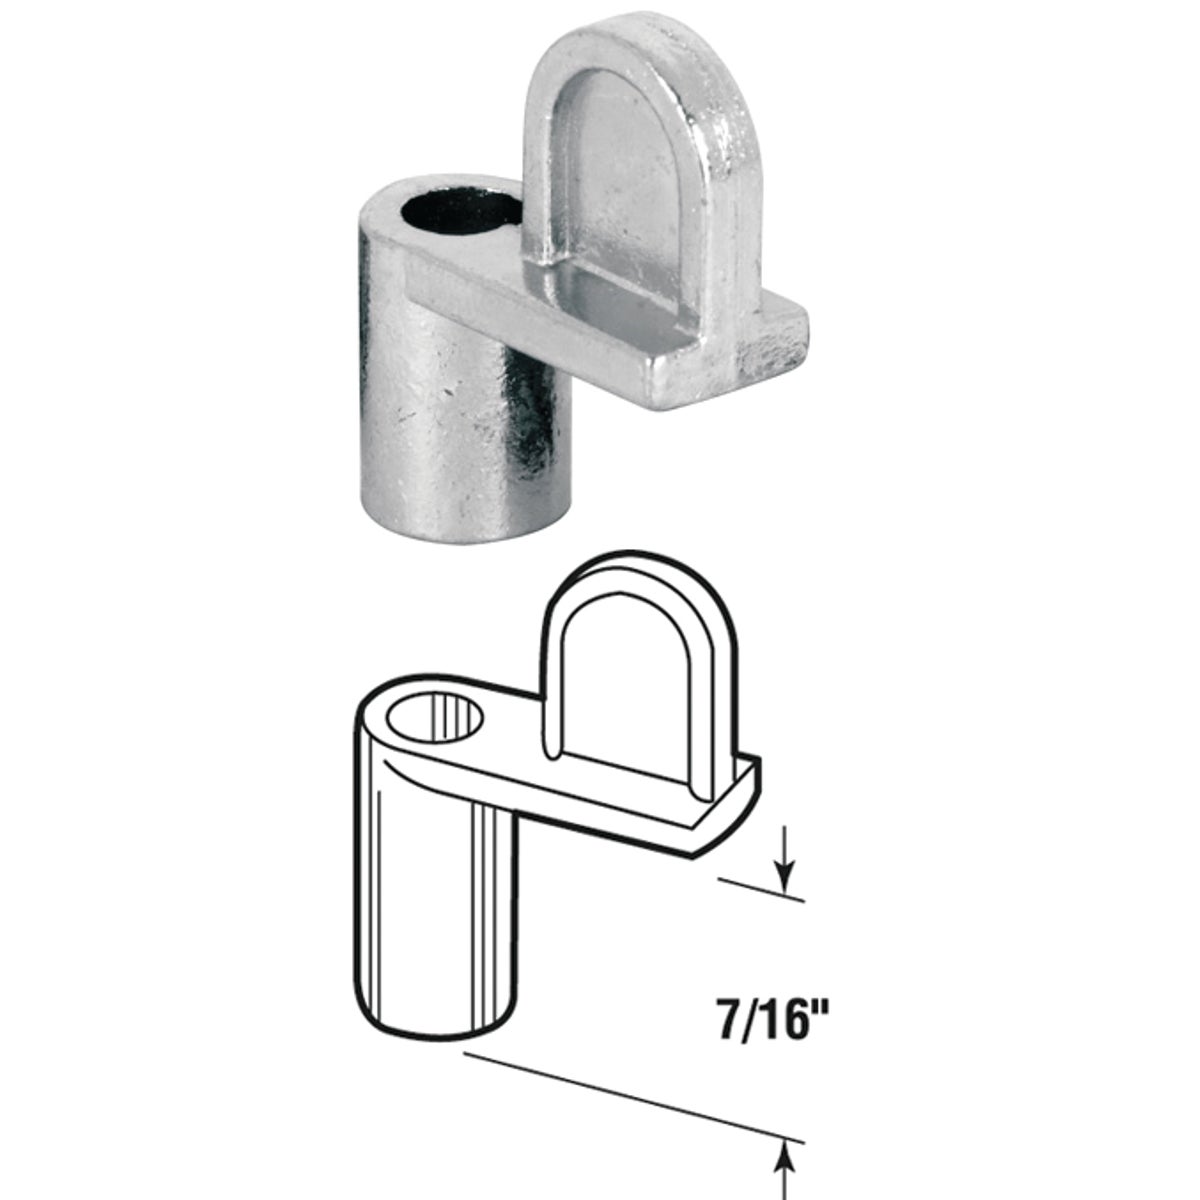 Item 228893, Die-cast plated clips used to secure window screens, storm windows and 